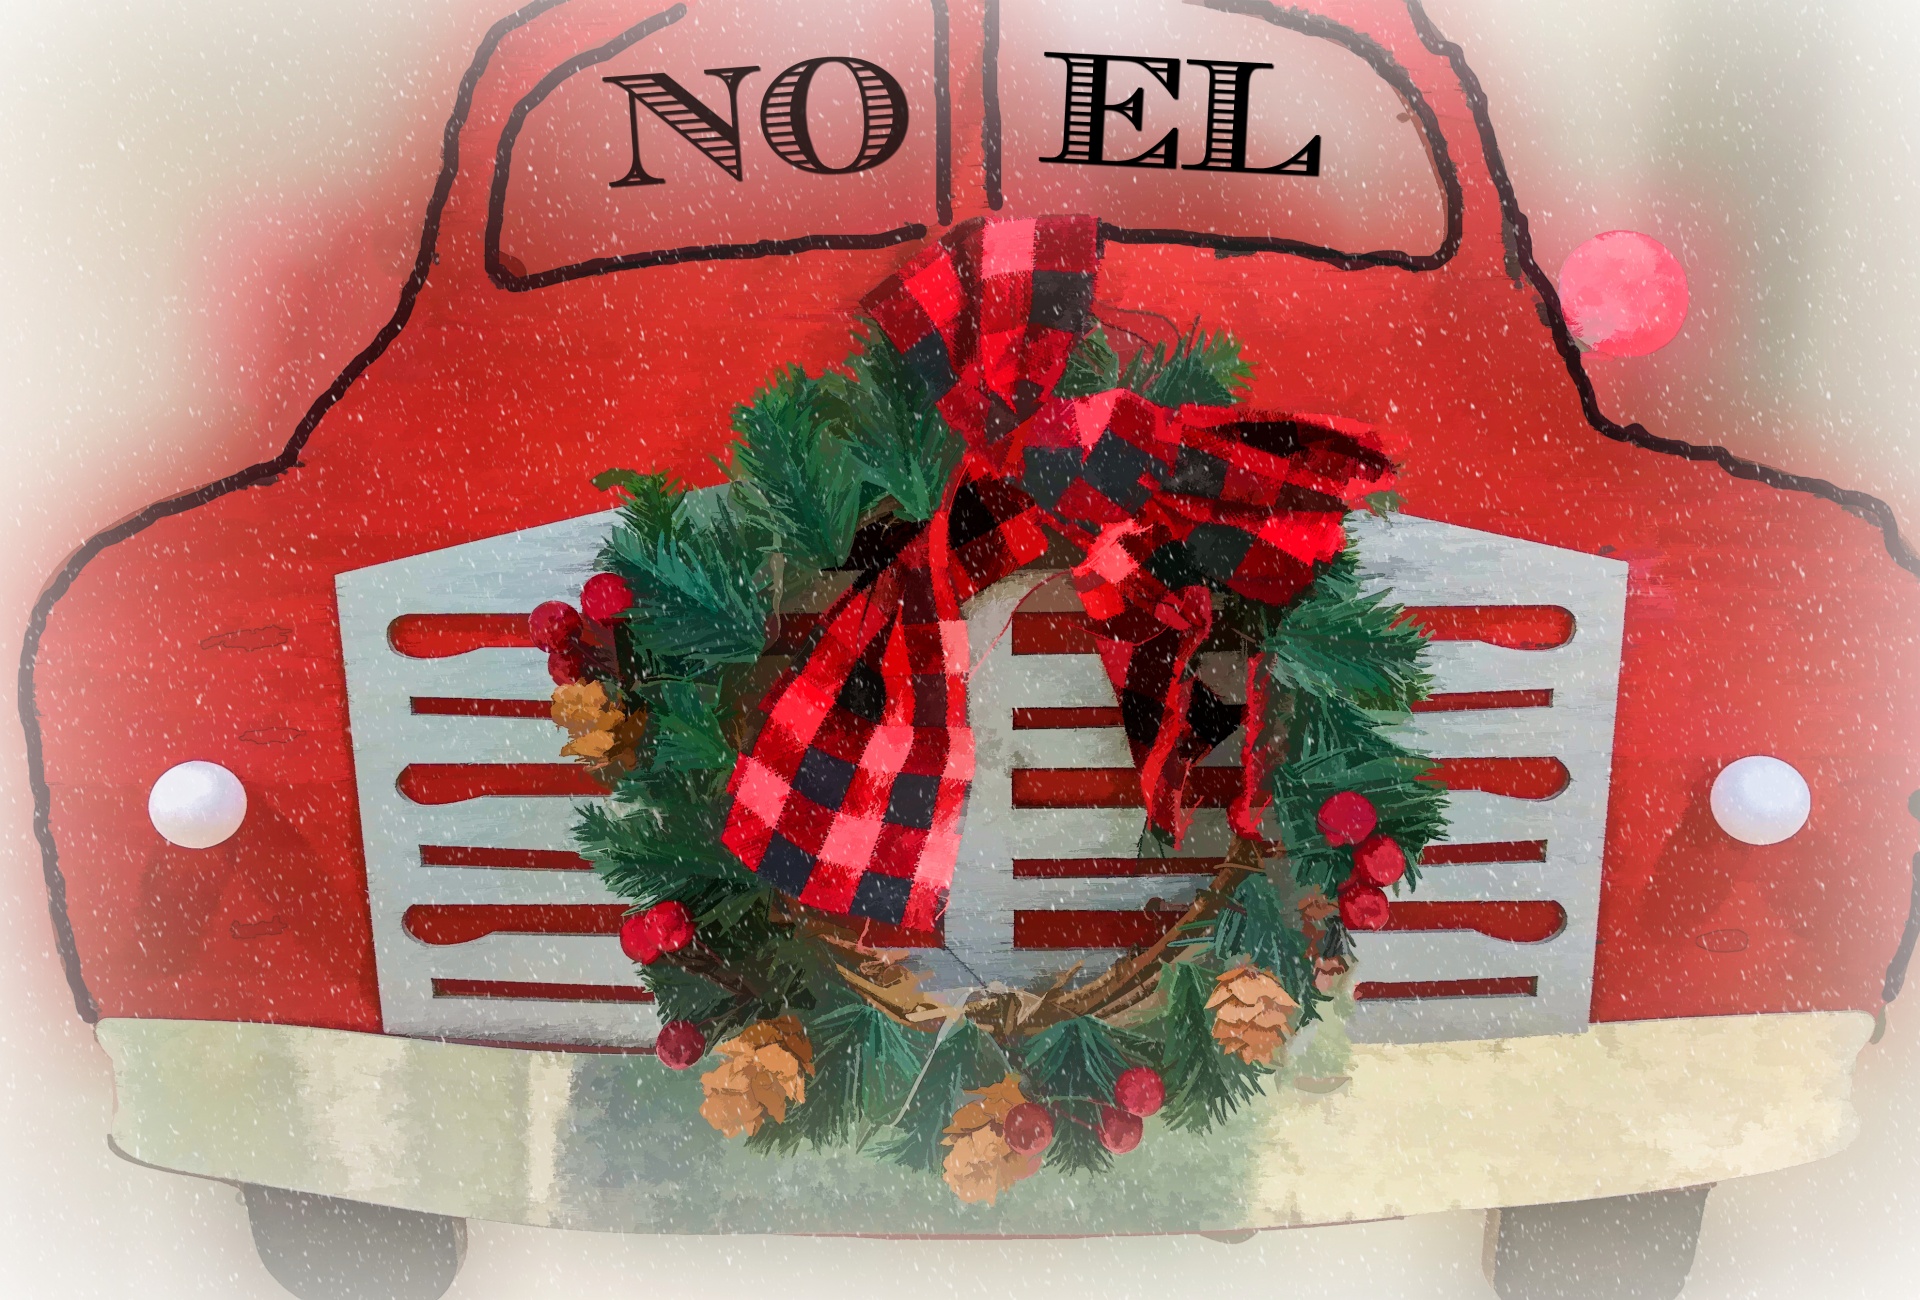 vintage car cartoon with wreath on its grill and NOEL in windows